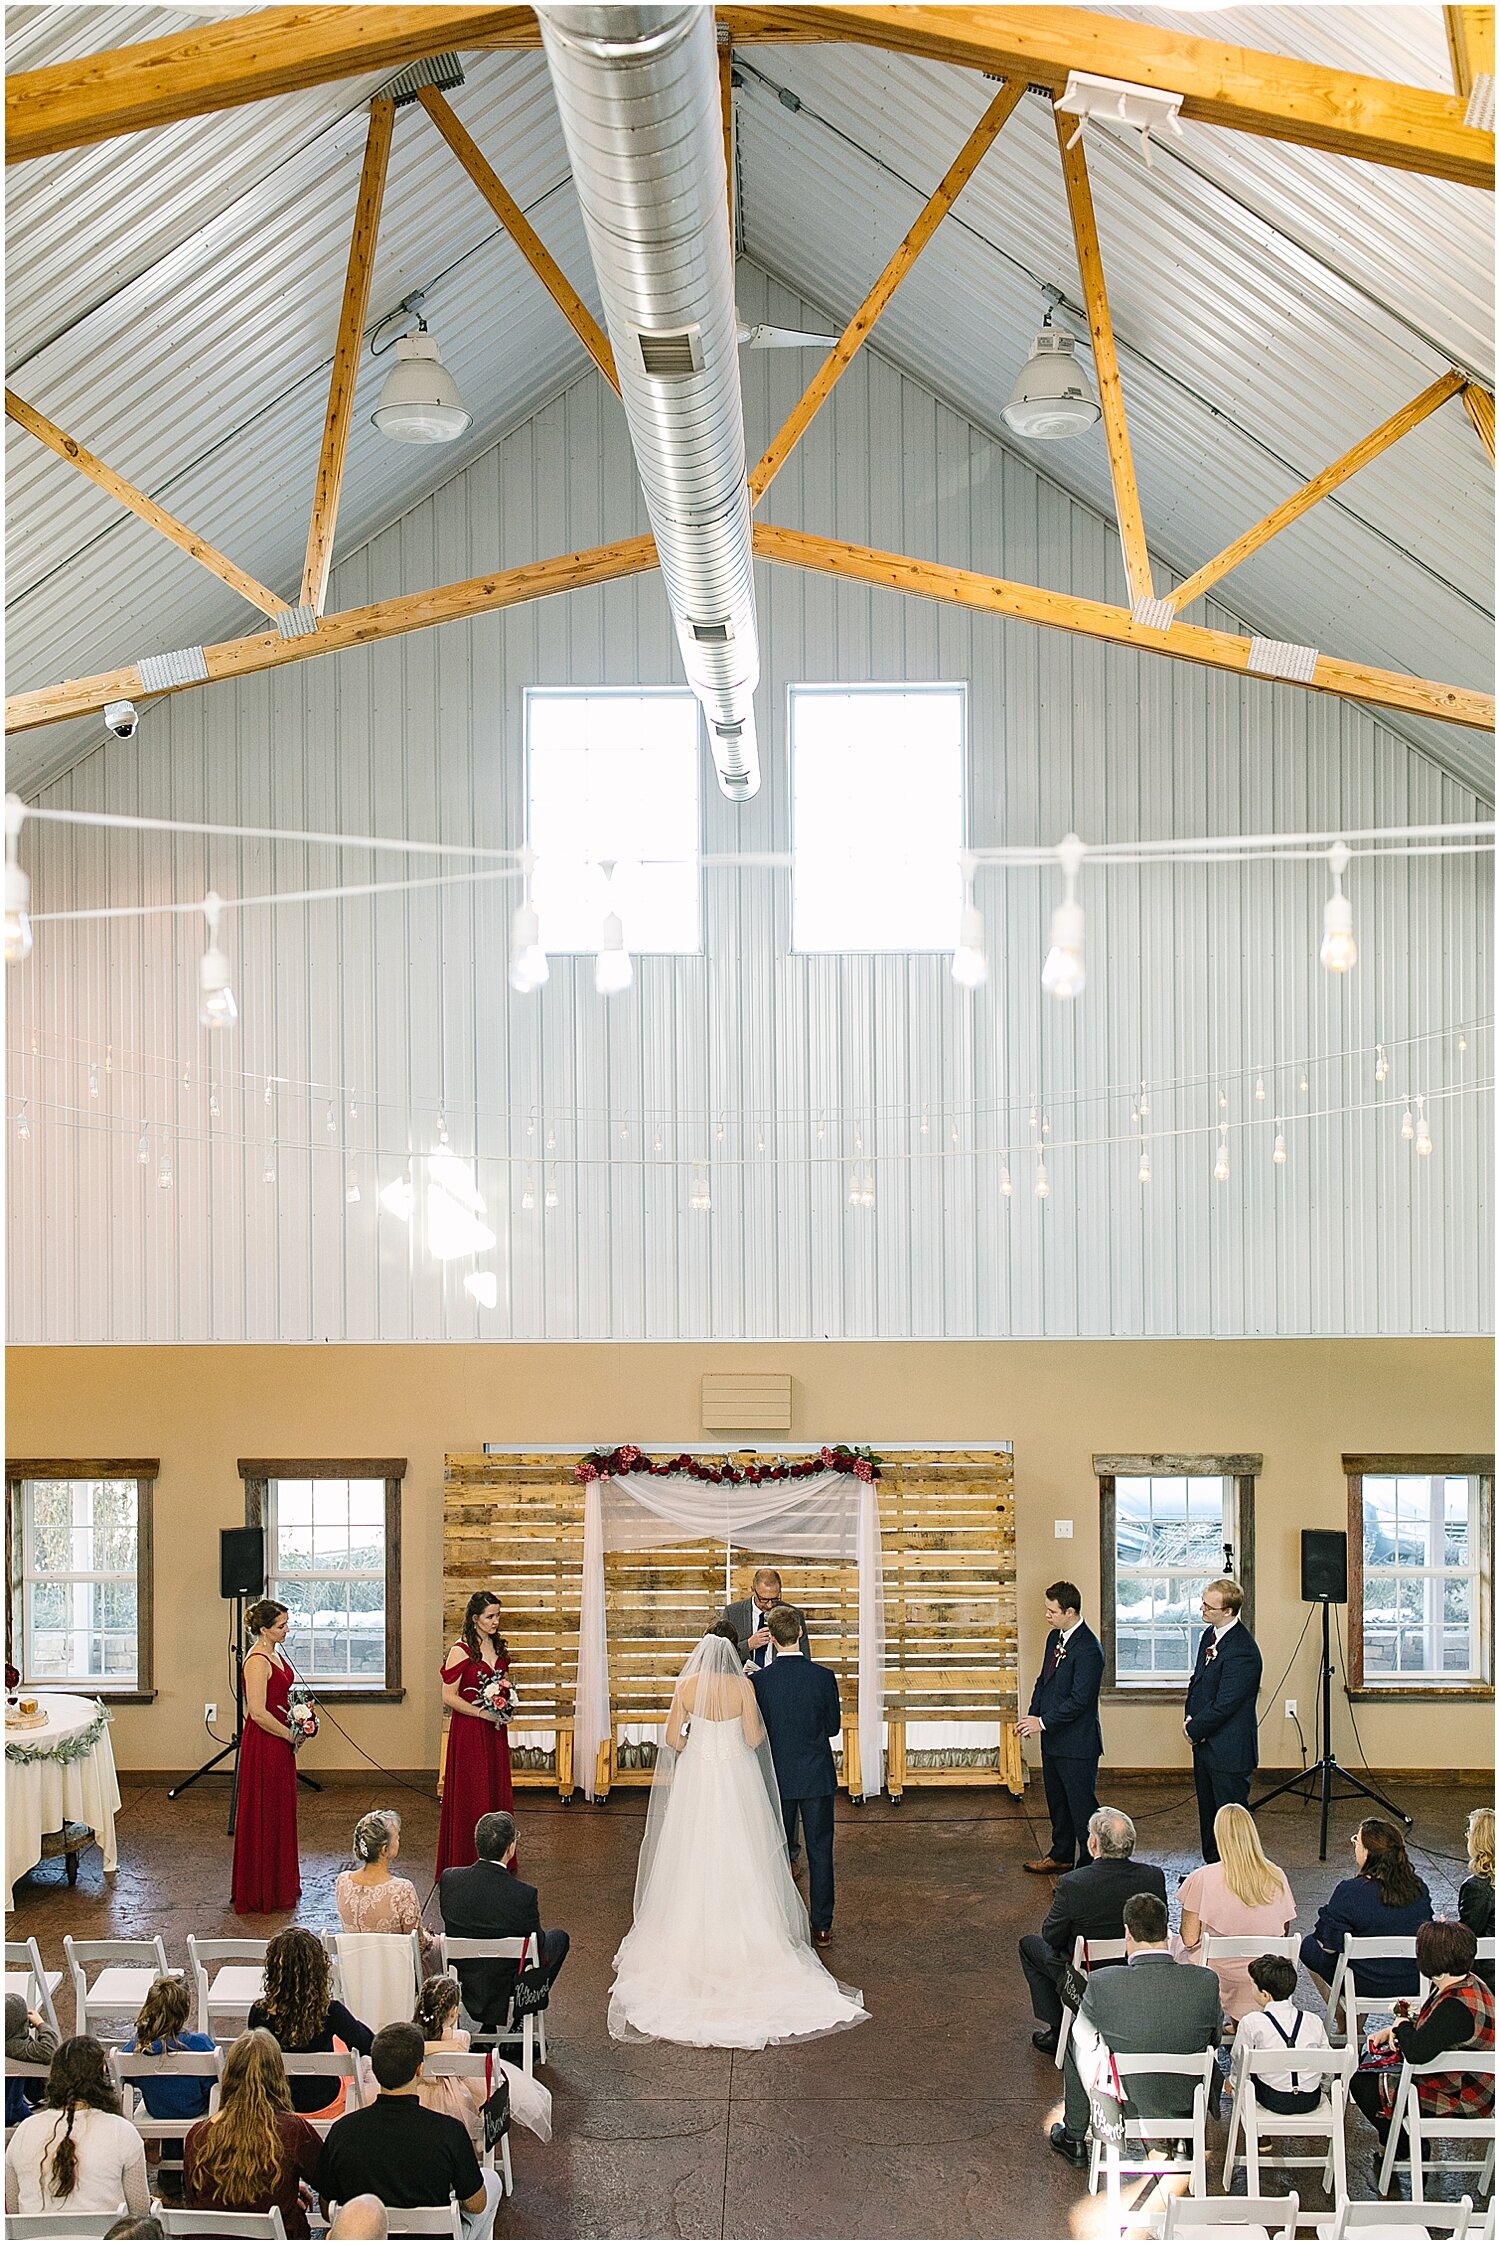  Indoor wedding ceremony at The outpost center 